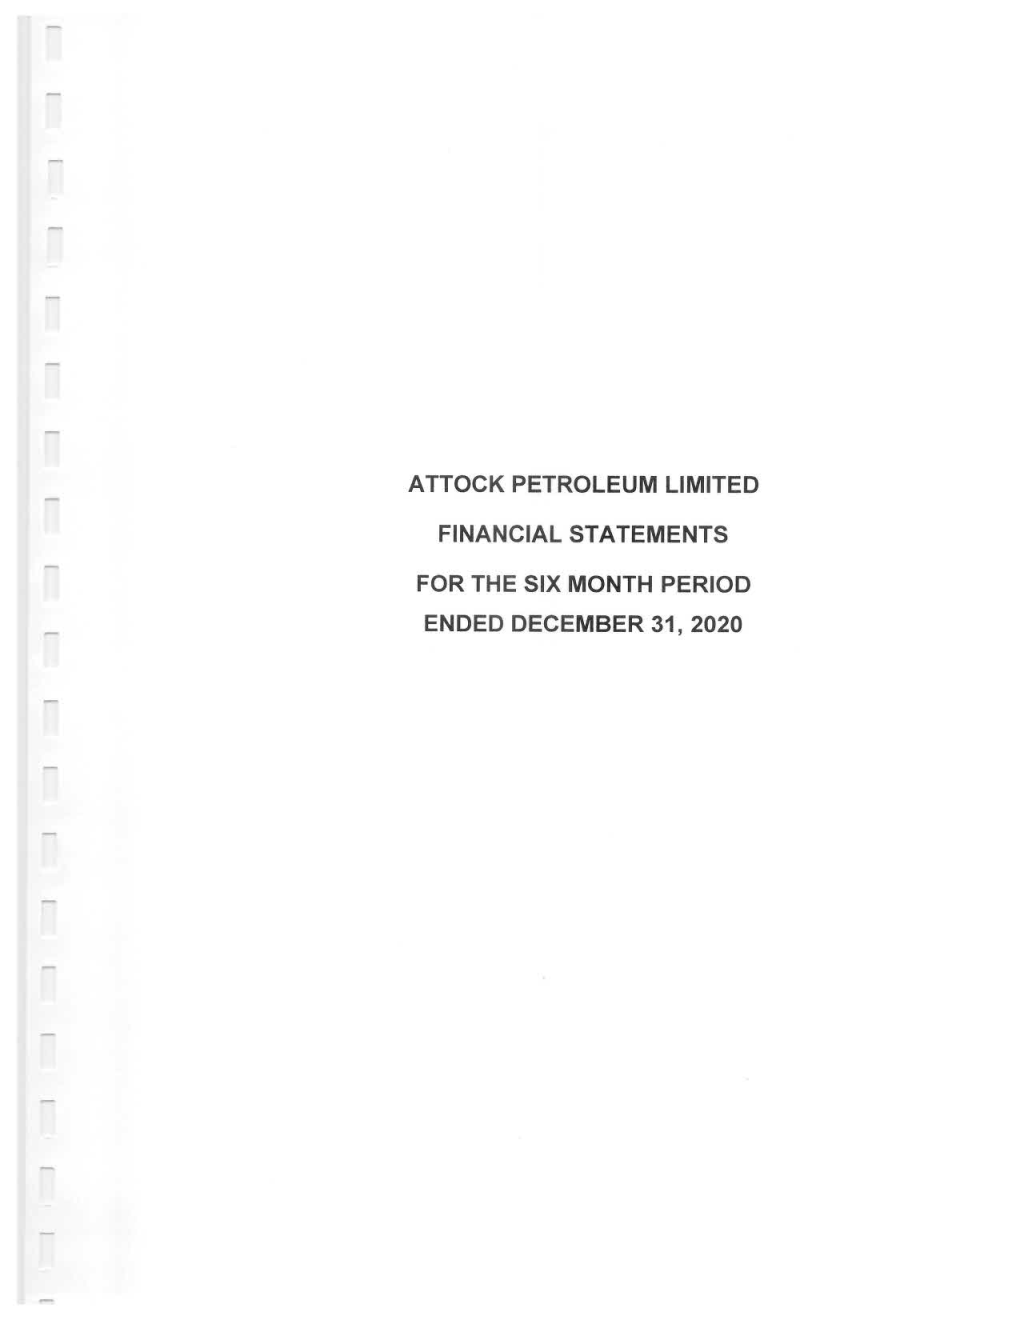 Attock Petroleum Limited Financial Statements For